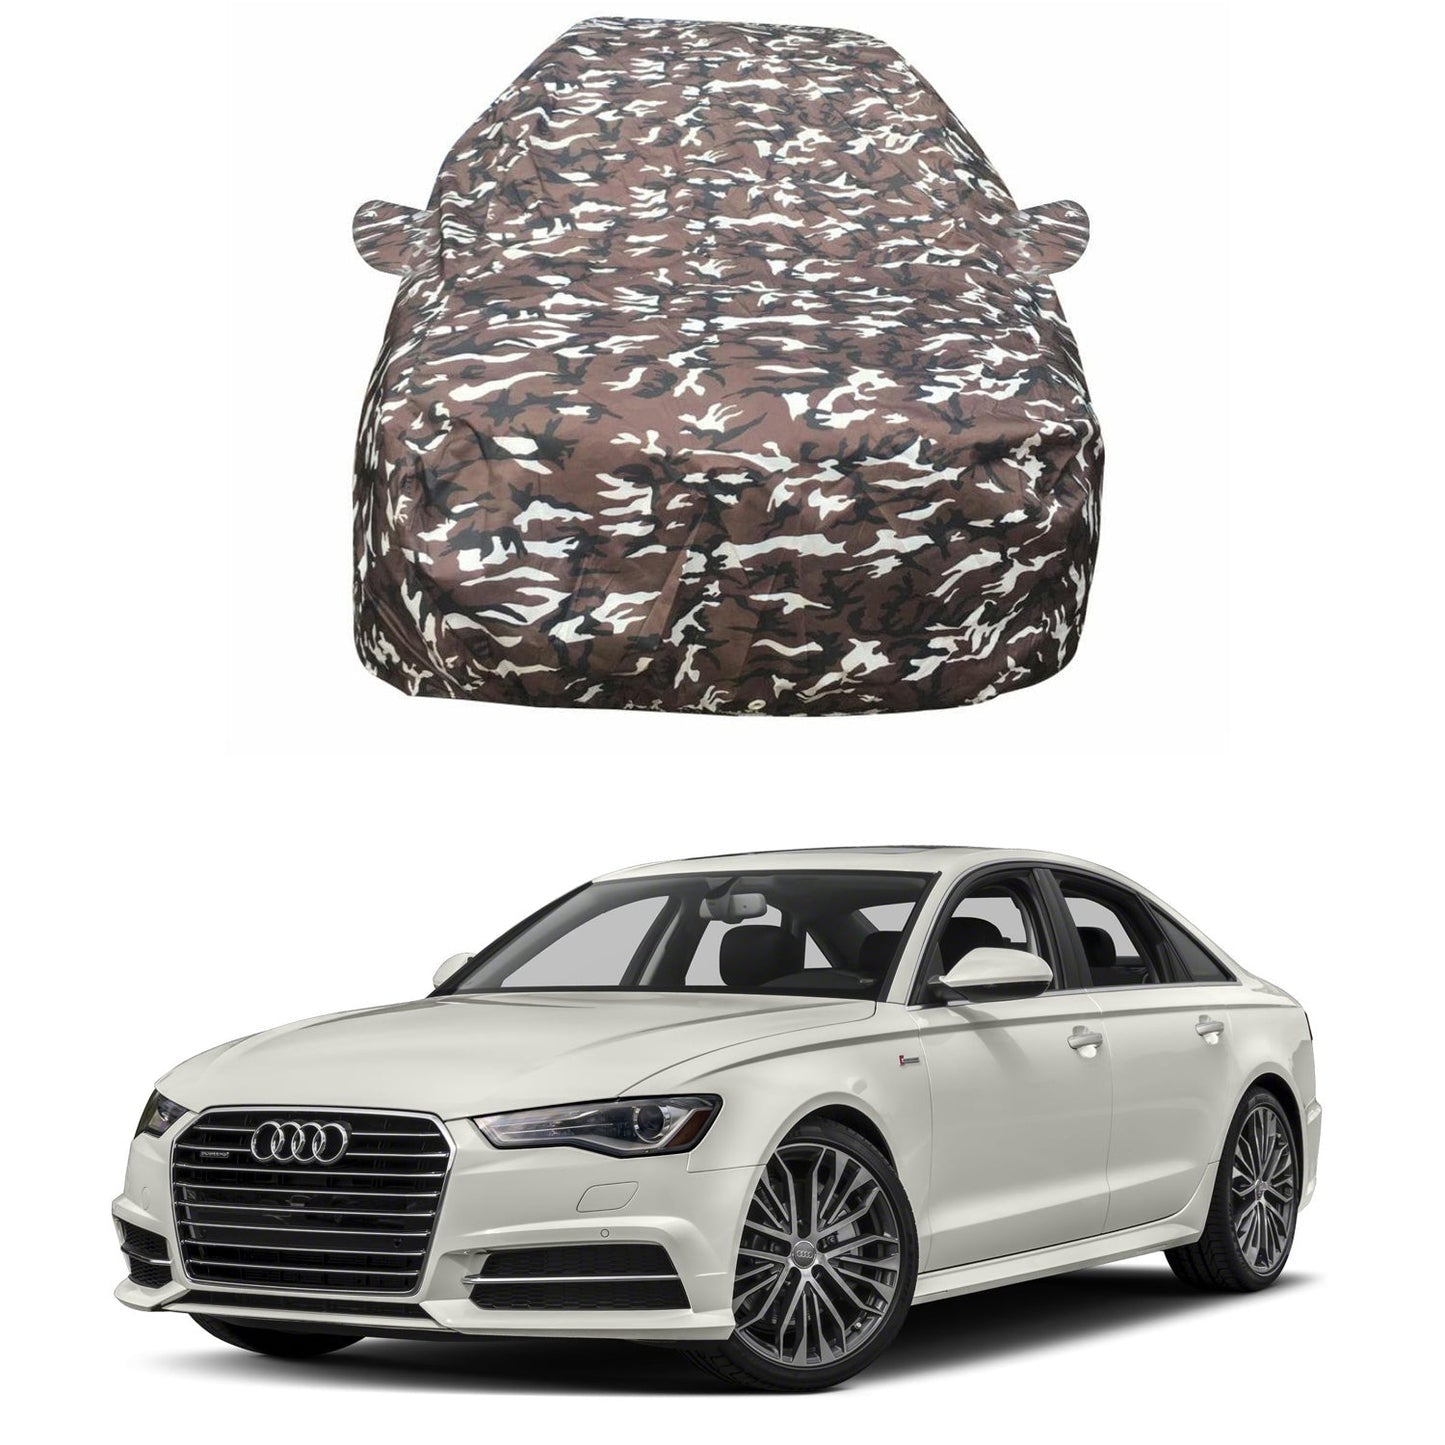 Oshotto Ranger Design Made of 100% Waterproof Fabric Multicolor Car Body Cover with Mirror Pockets For Audi A6